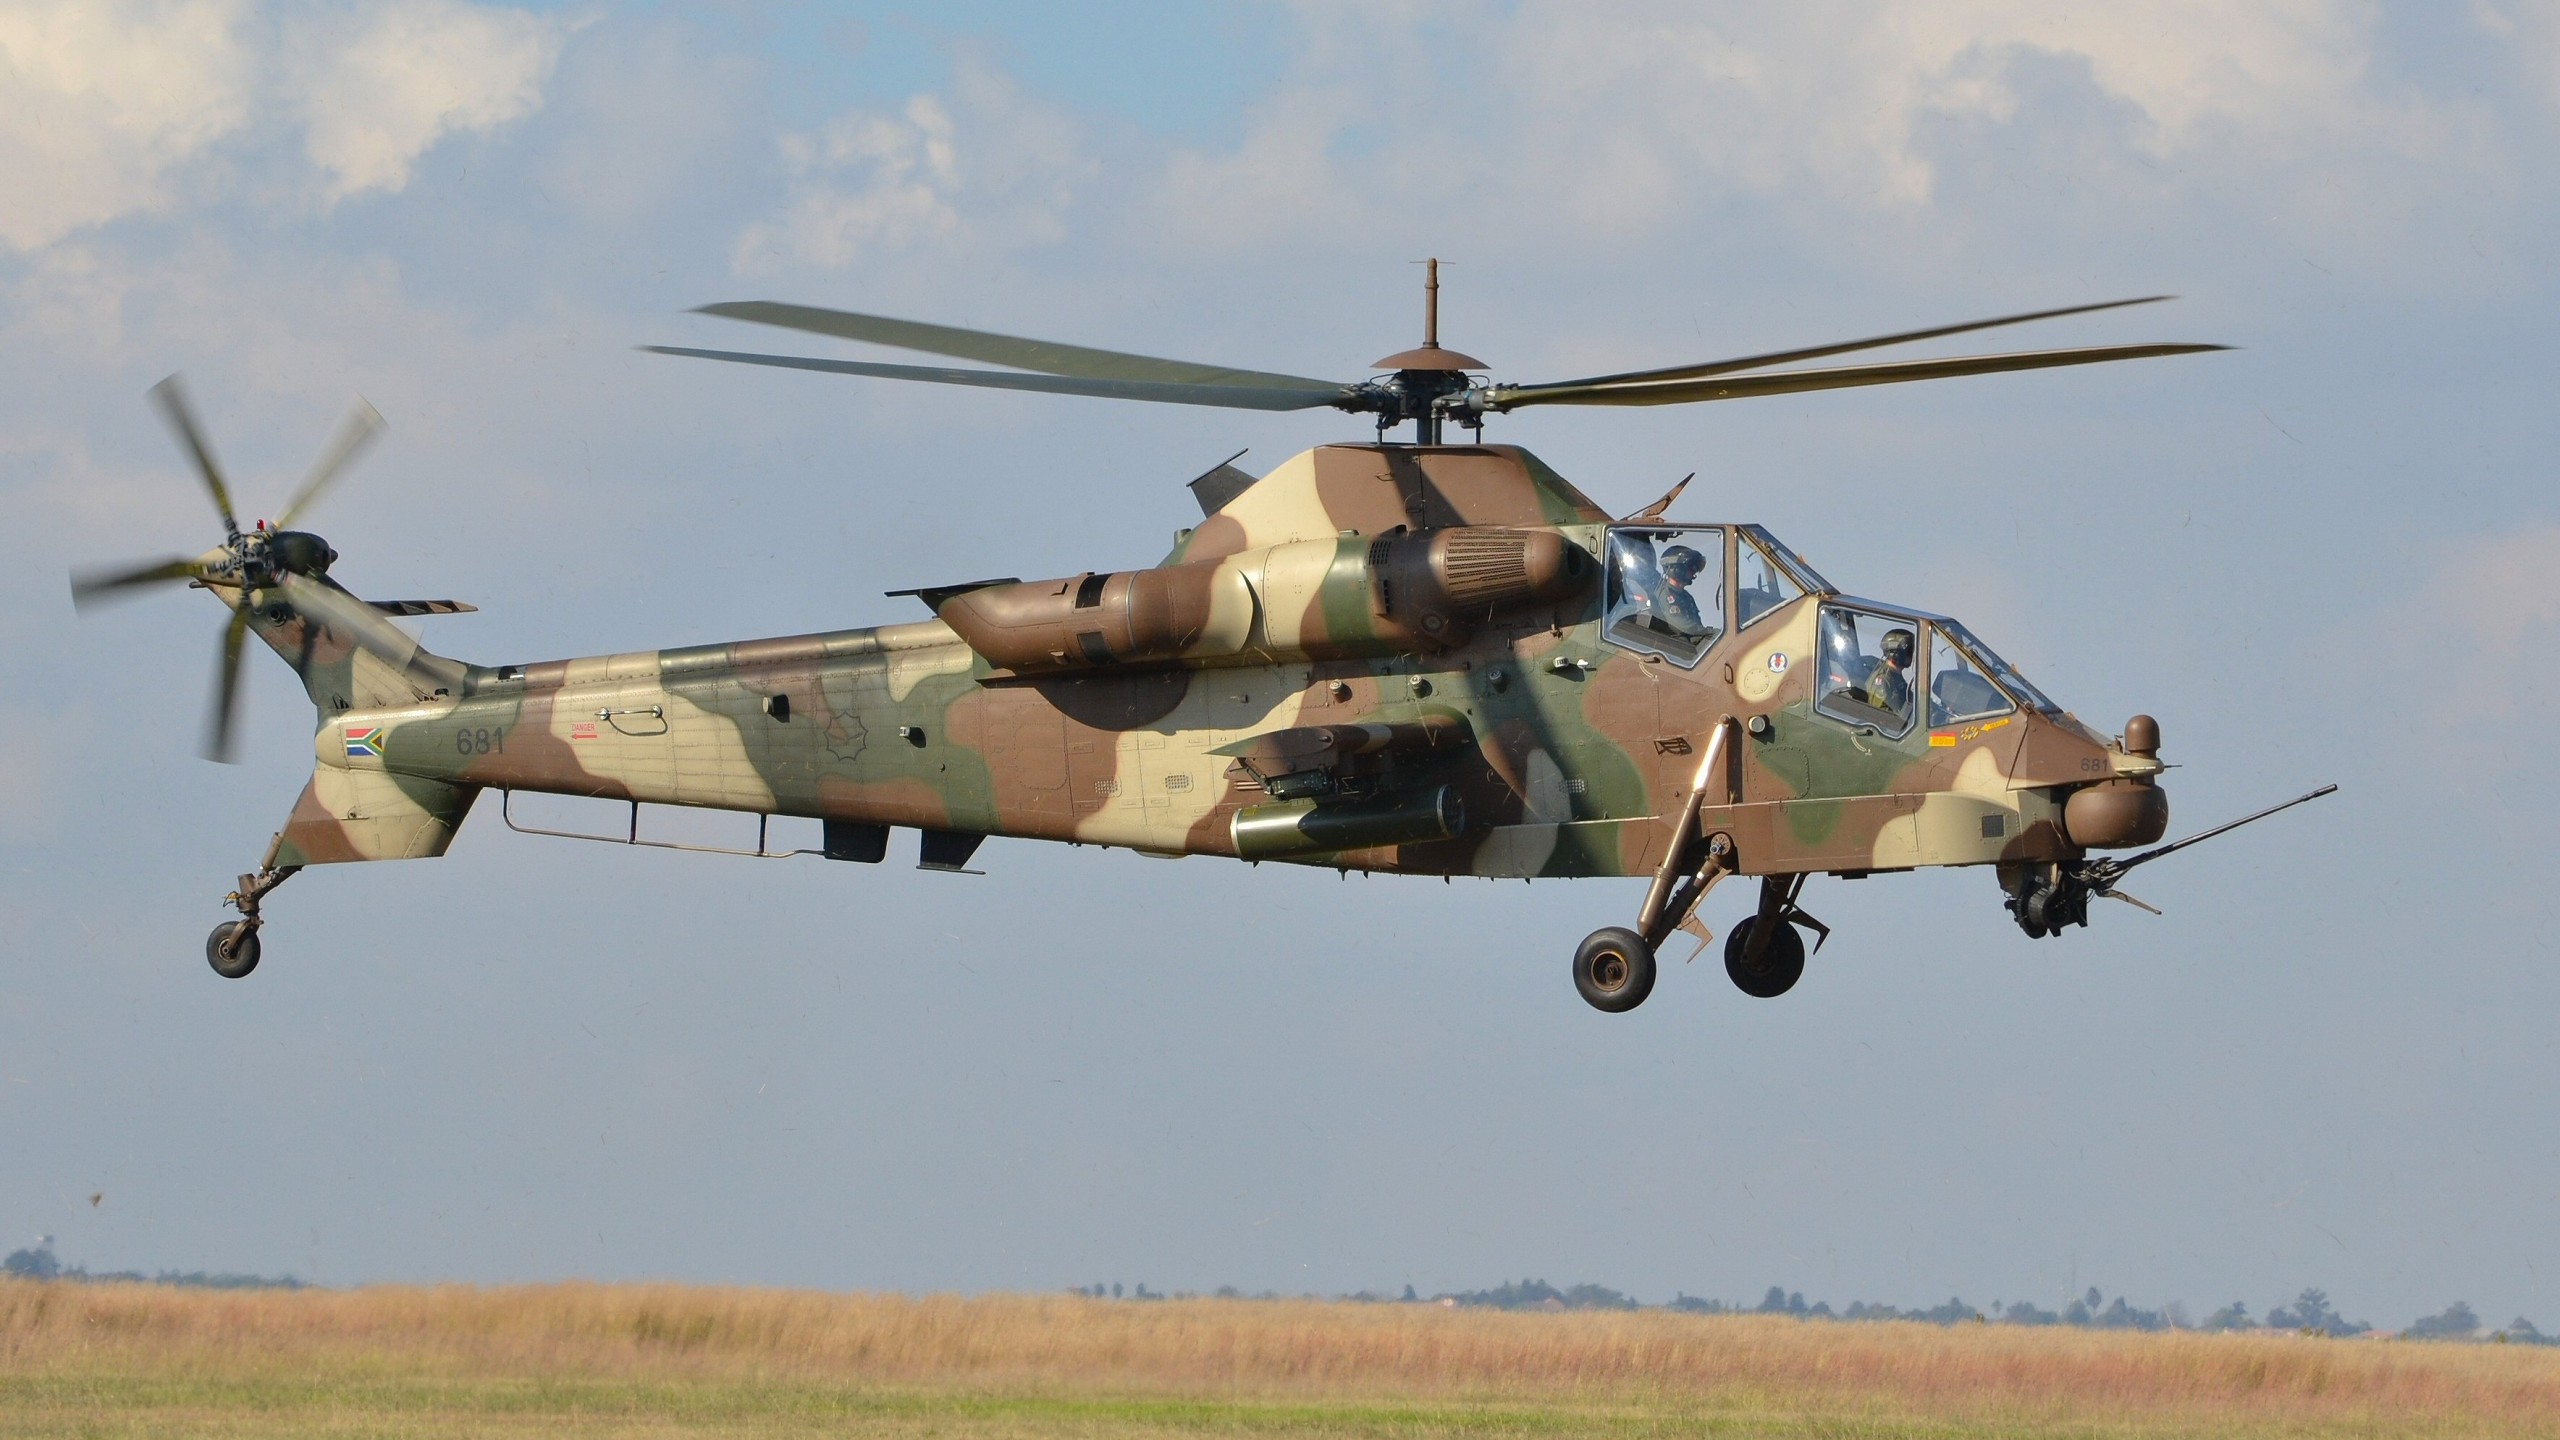 Wallpaper Denel Ah Rooivalk Attack Helicopter South African